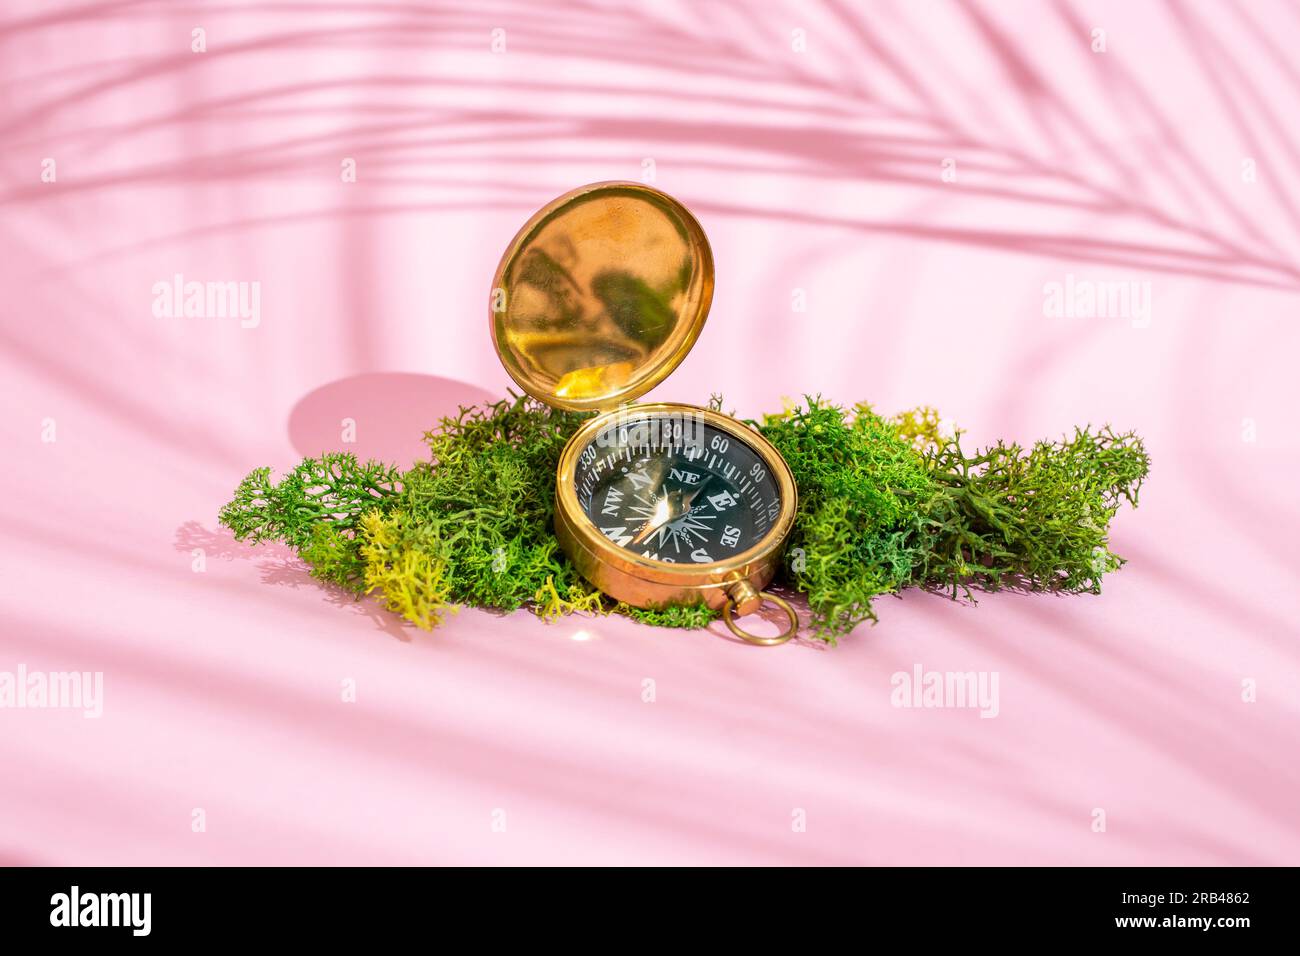 Golden compass on green lichen with pink background and palm leaves shadows, travel concept mockup Stock Photo